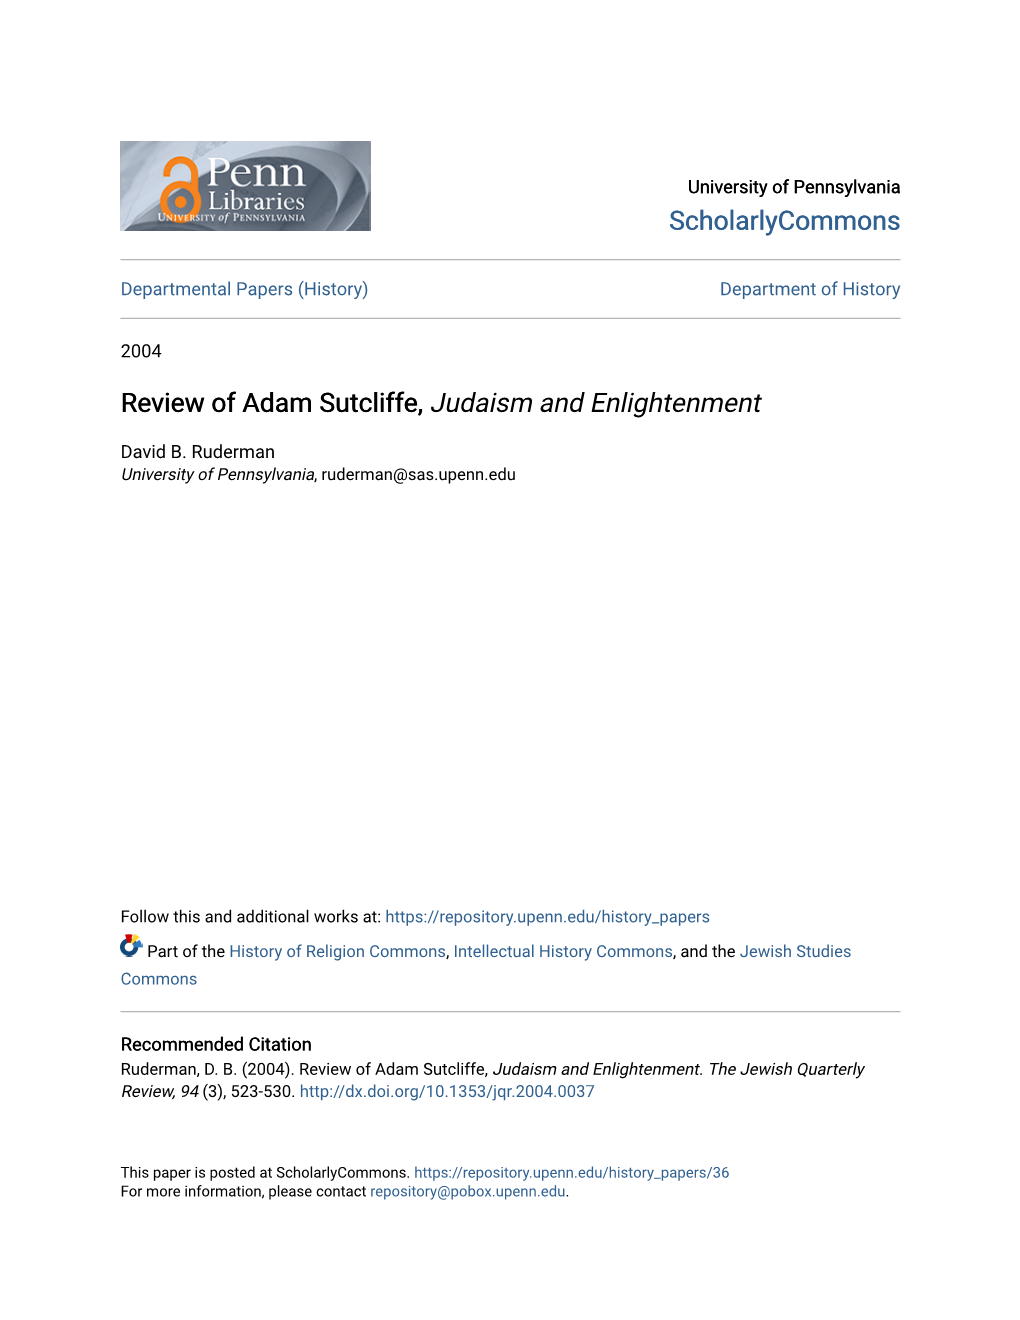 Review of Adam Sutcliffe, Judaism and Enlightenment